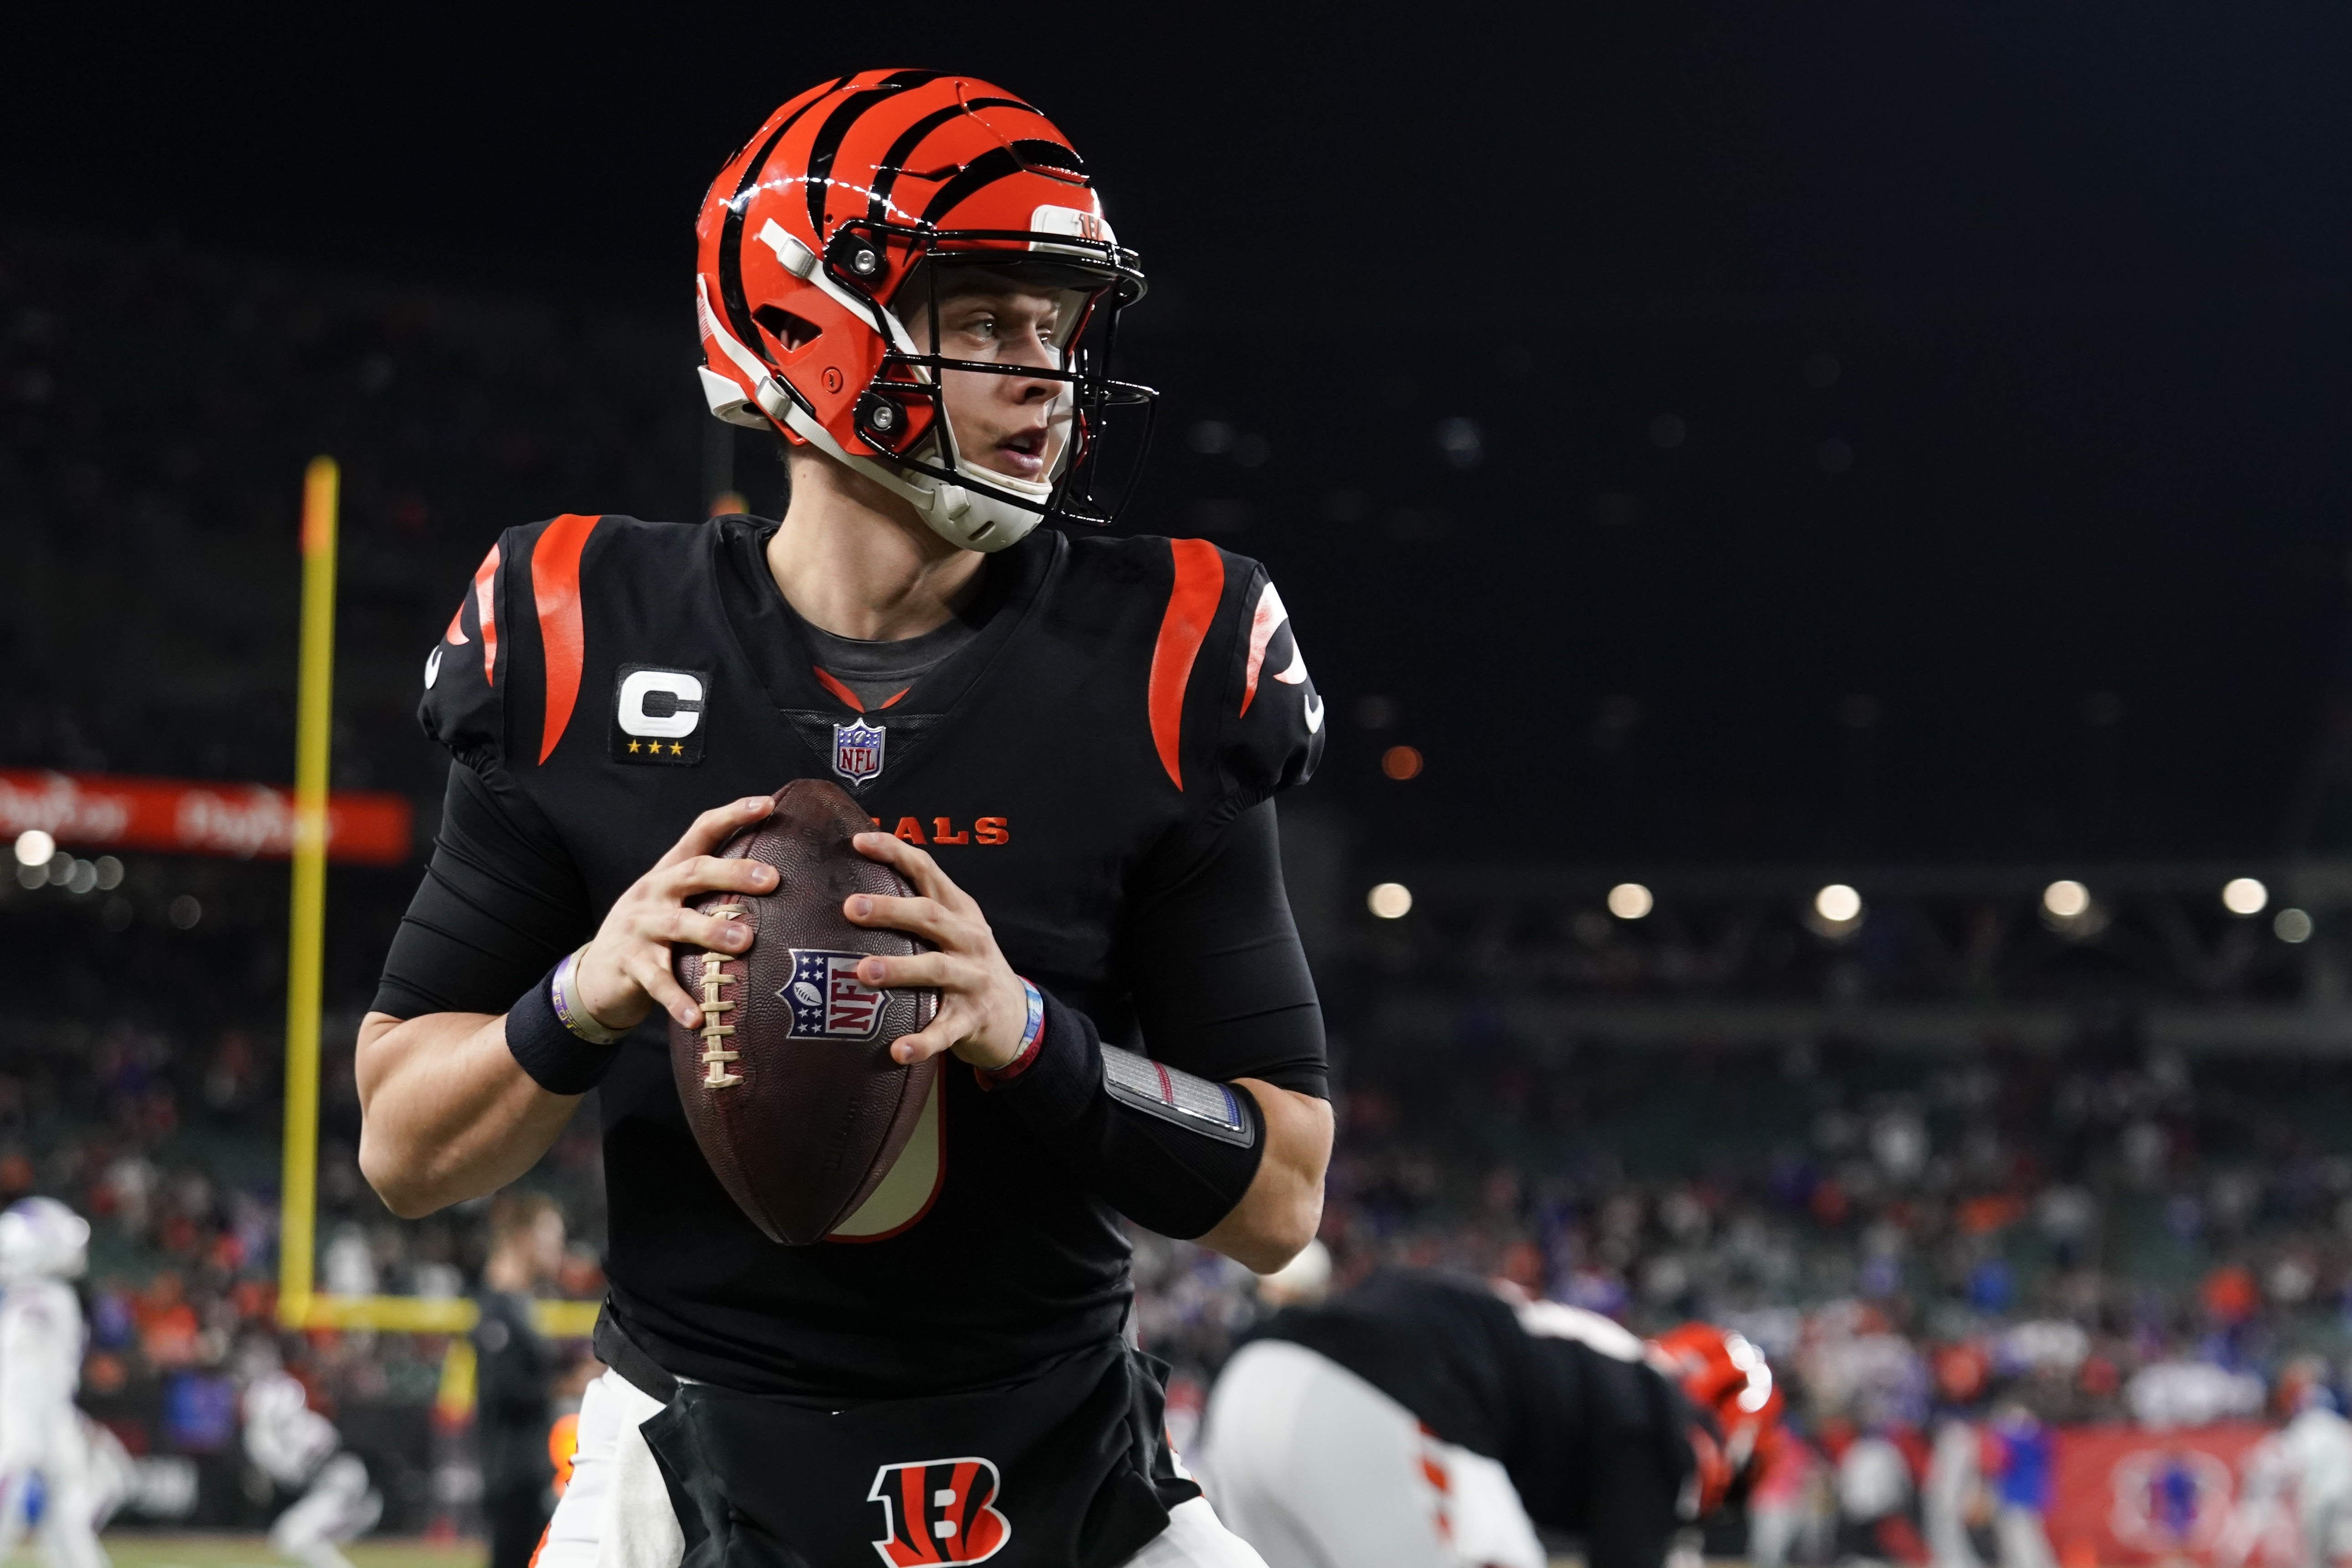 Bengals hope Burrow-Chase connection produces Super Bowl win - The